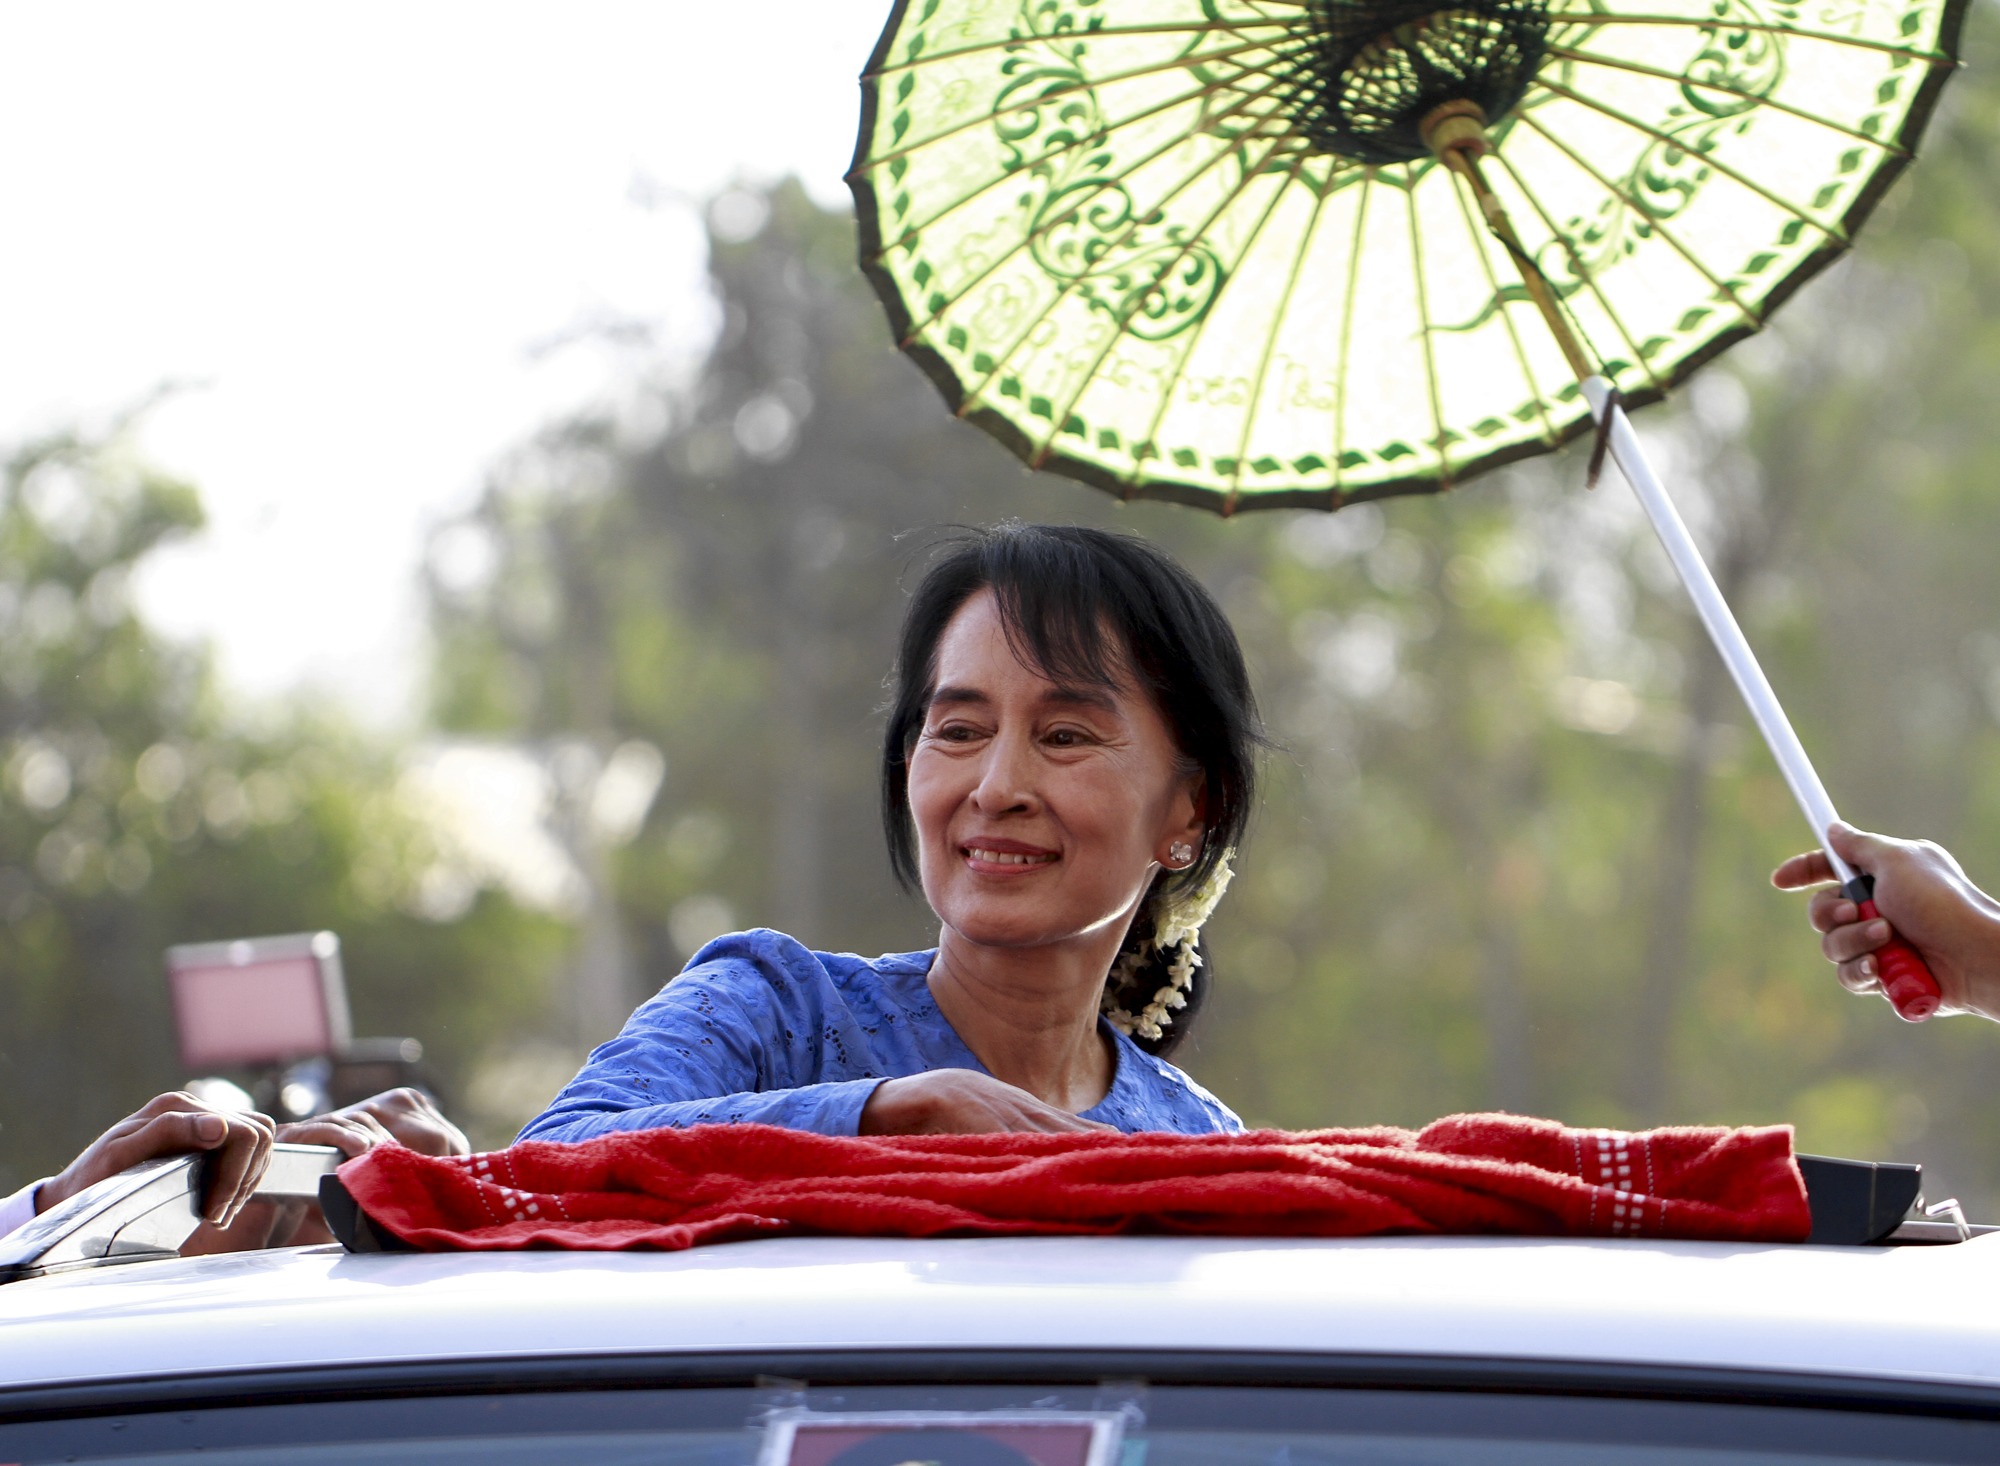 National League for Democracy leader Aung San Suu Kyi during the 2012 campaign in Burma. Image via Wikipedia Commons. 